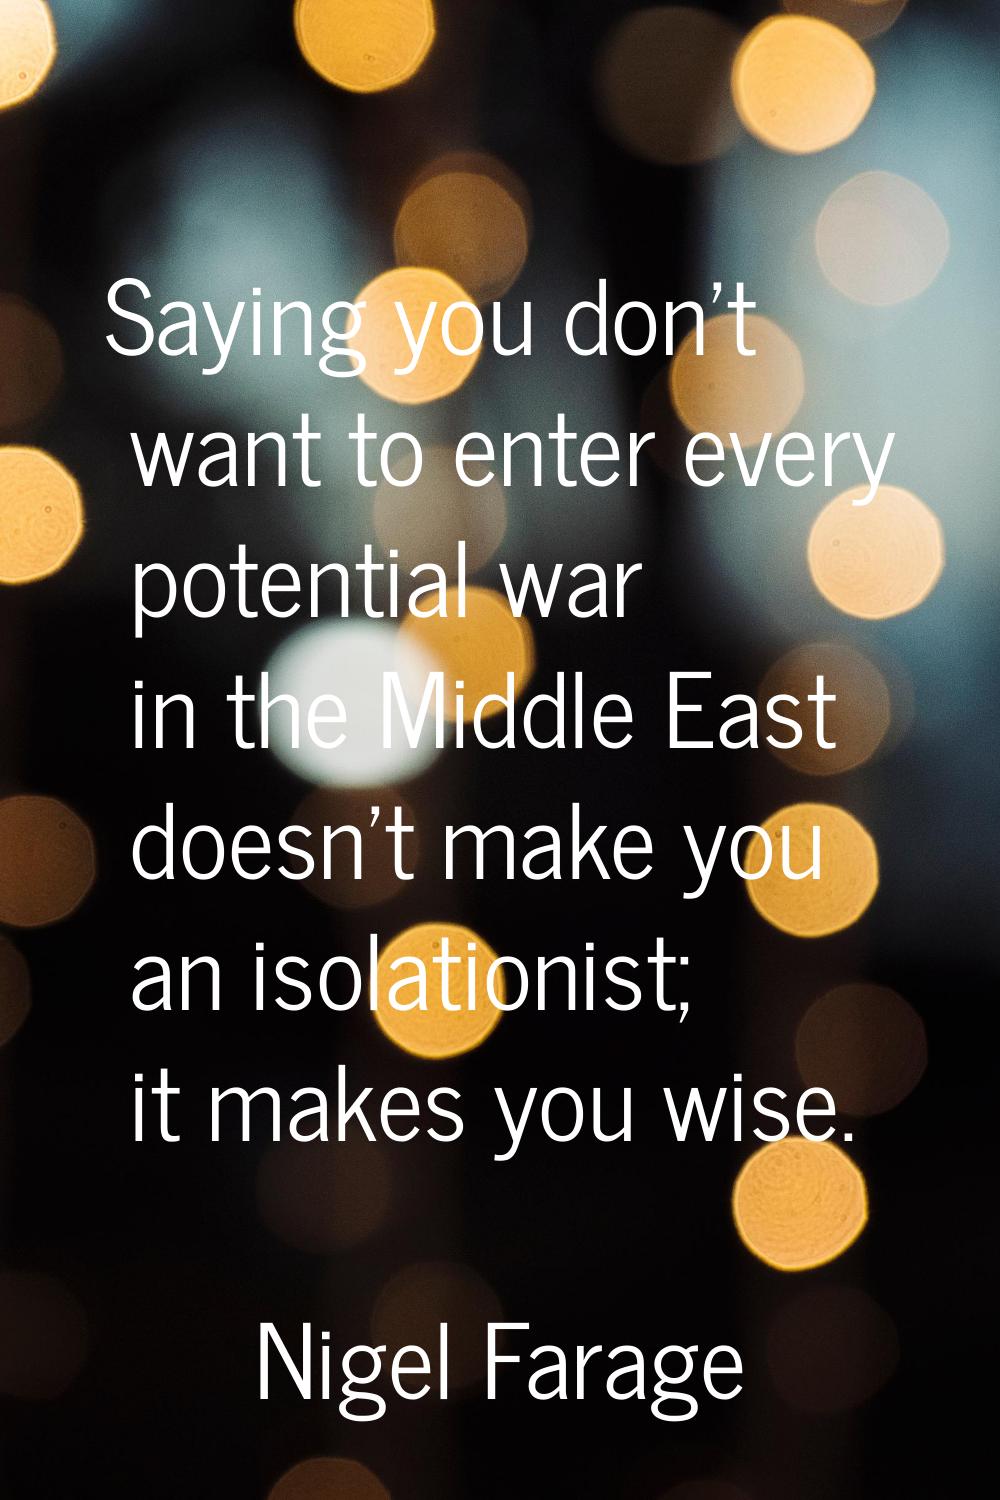 Saying you don't want to enter every potential war in the Middle East doesn't make you an isolation